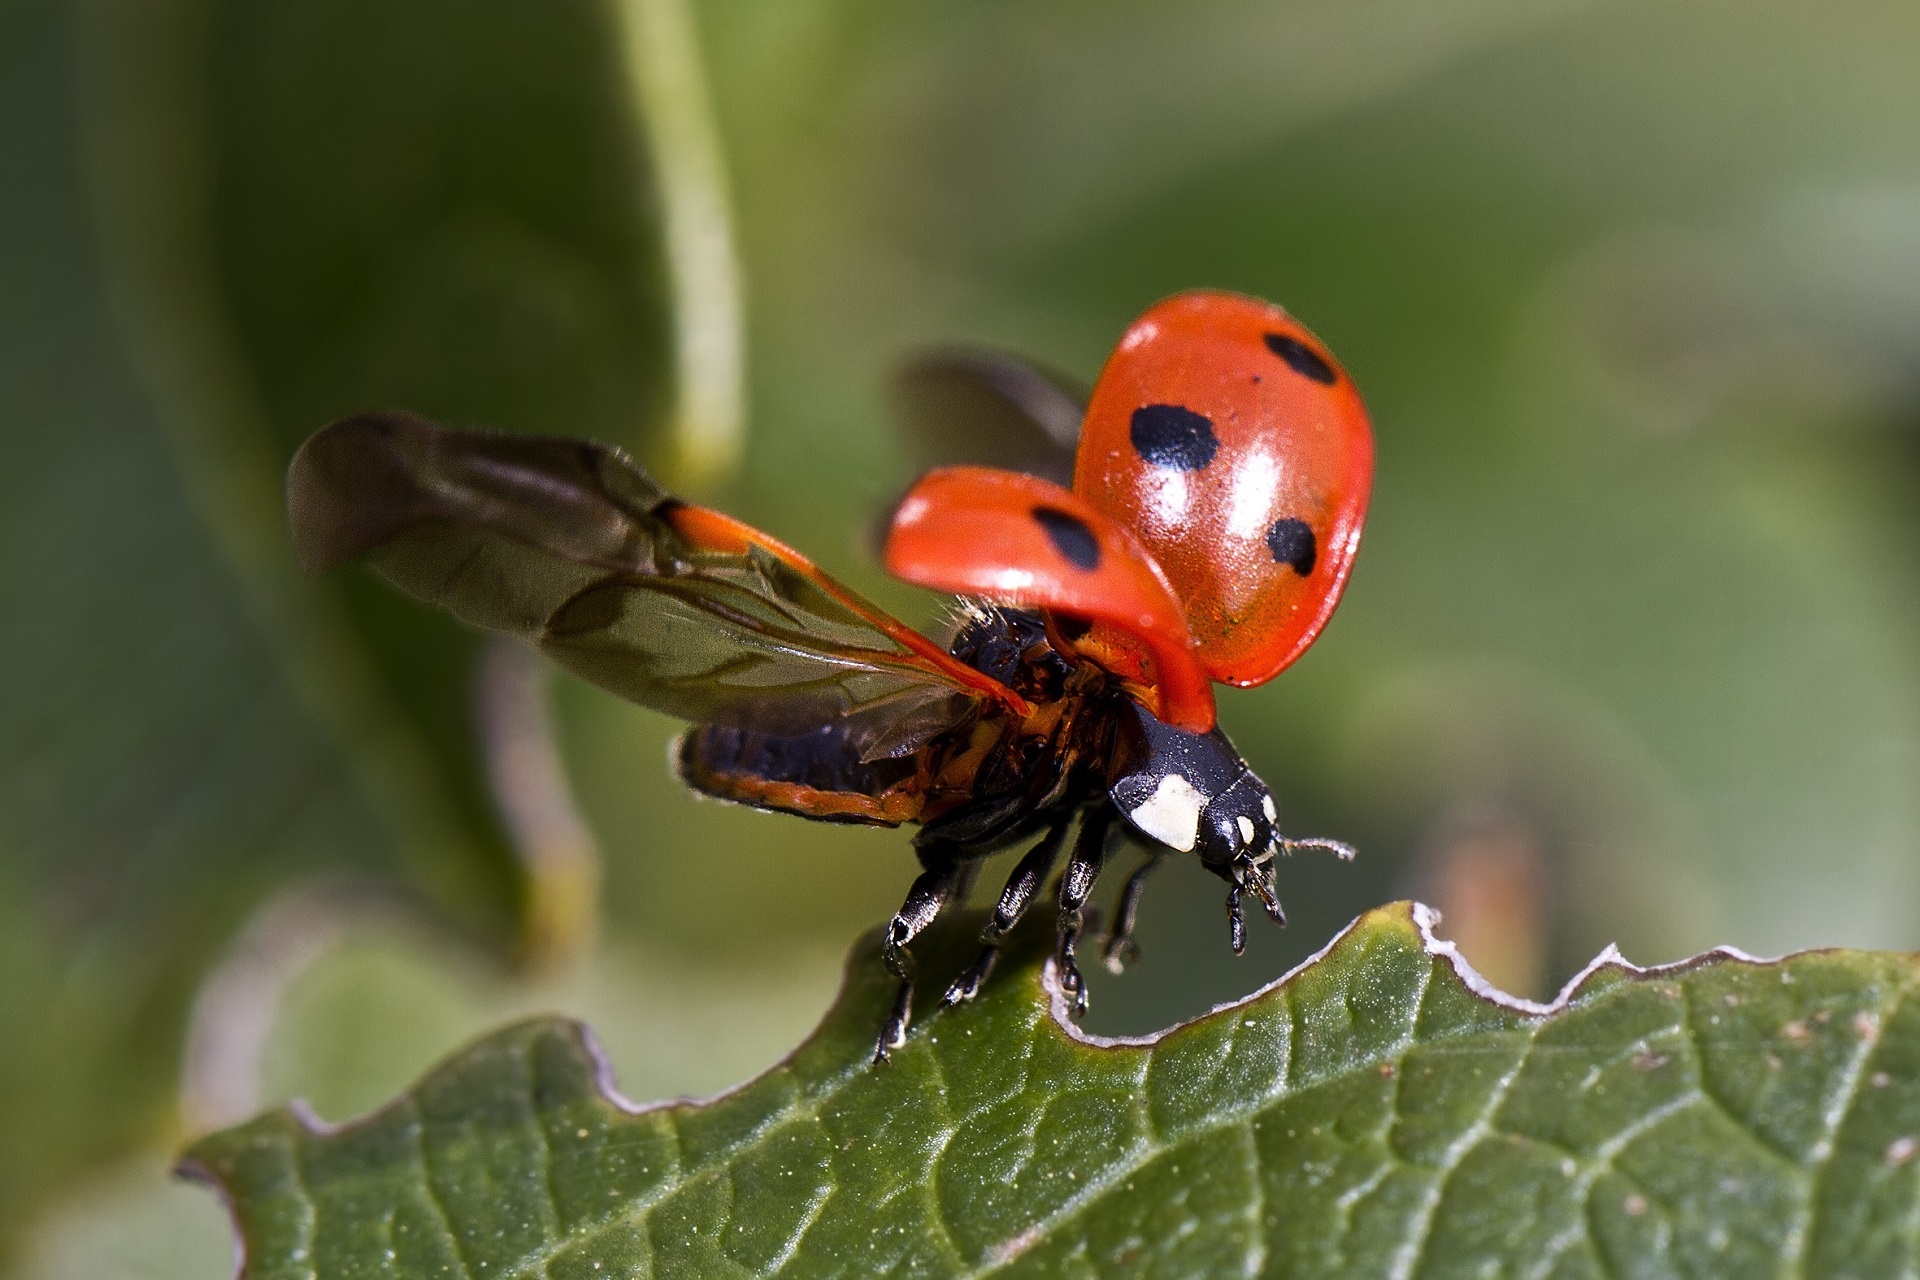 Ladybug beetles with wings spread while on a leaf